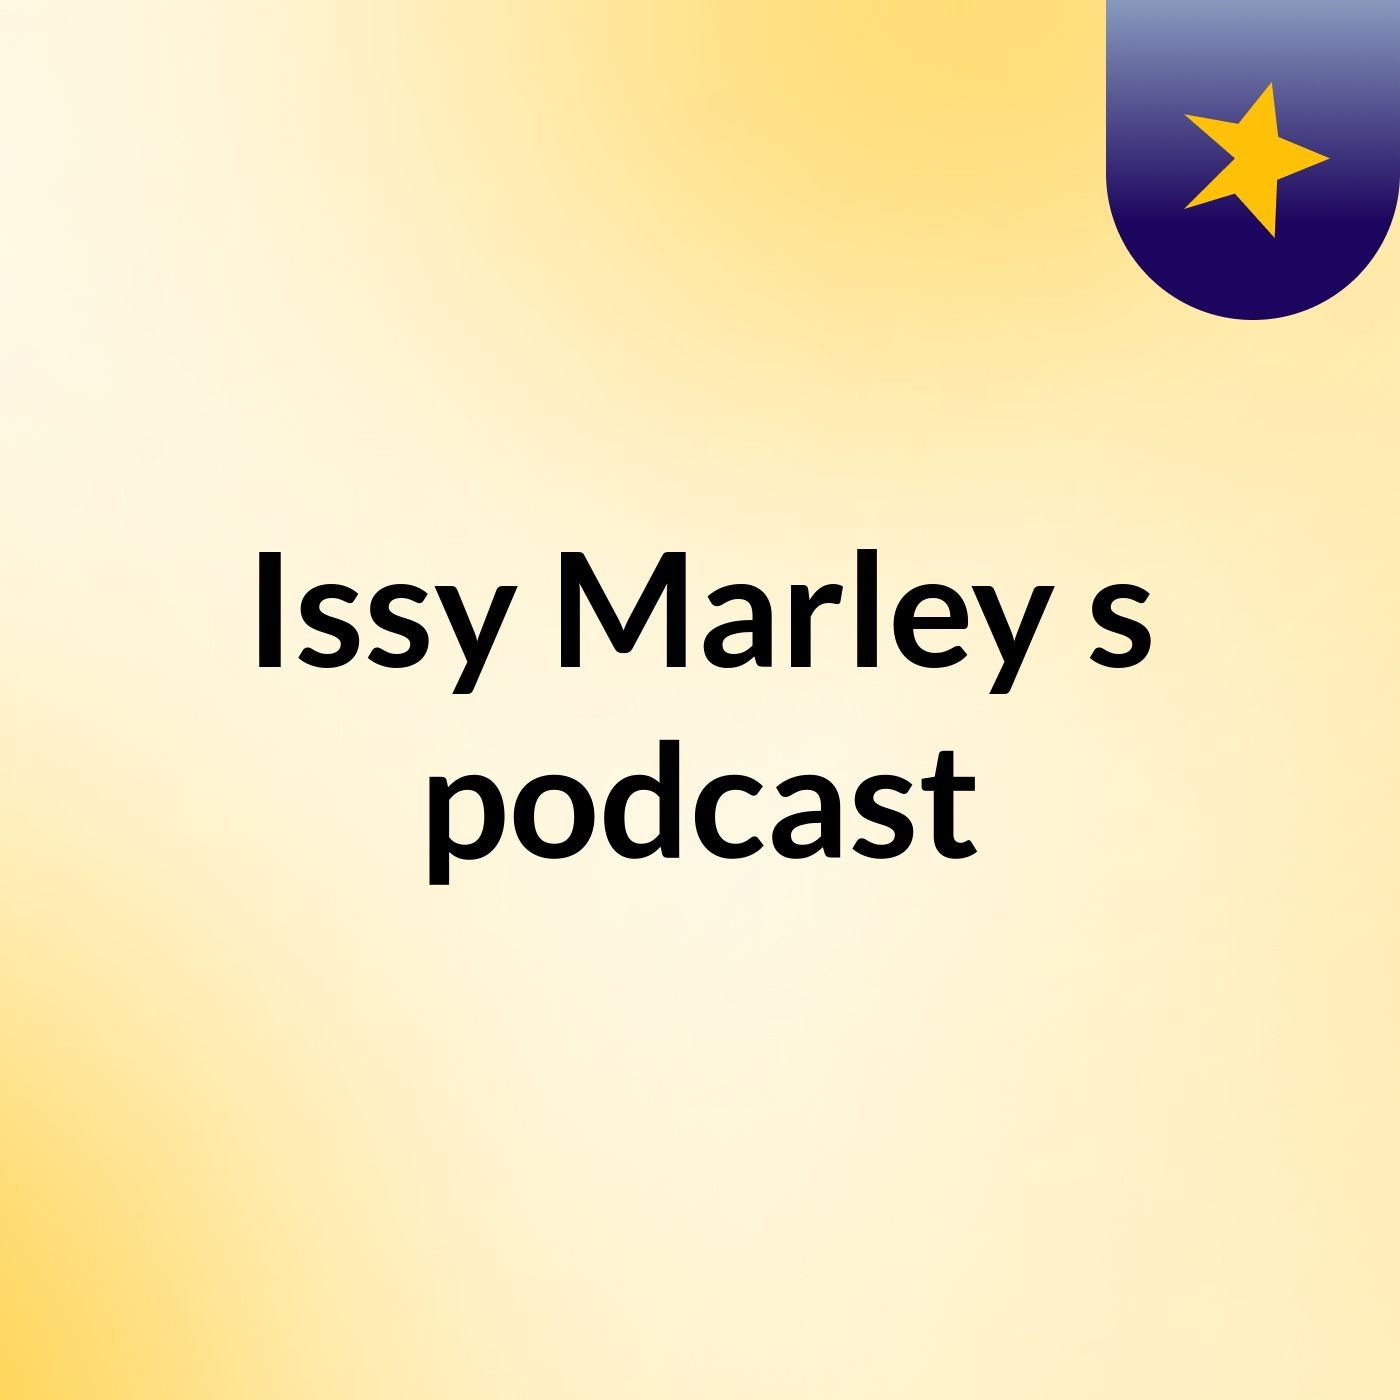 Issy Marley's podcast